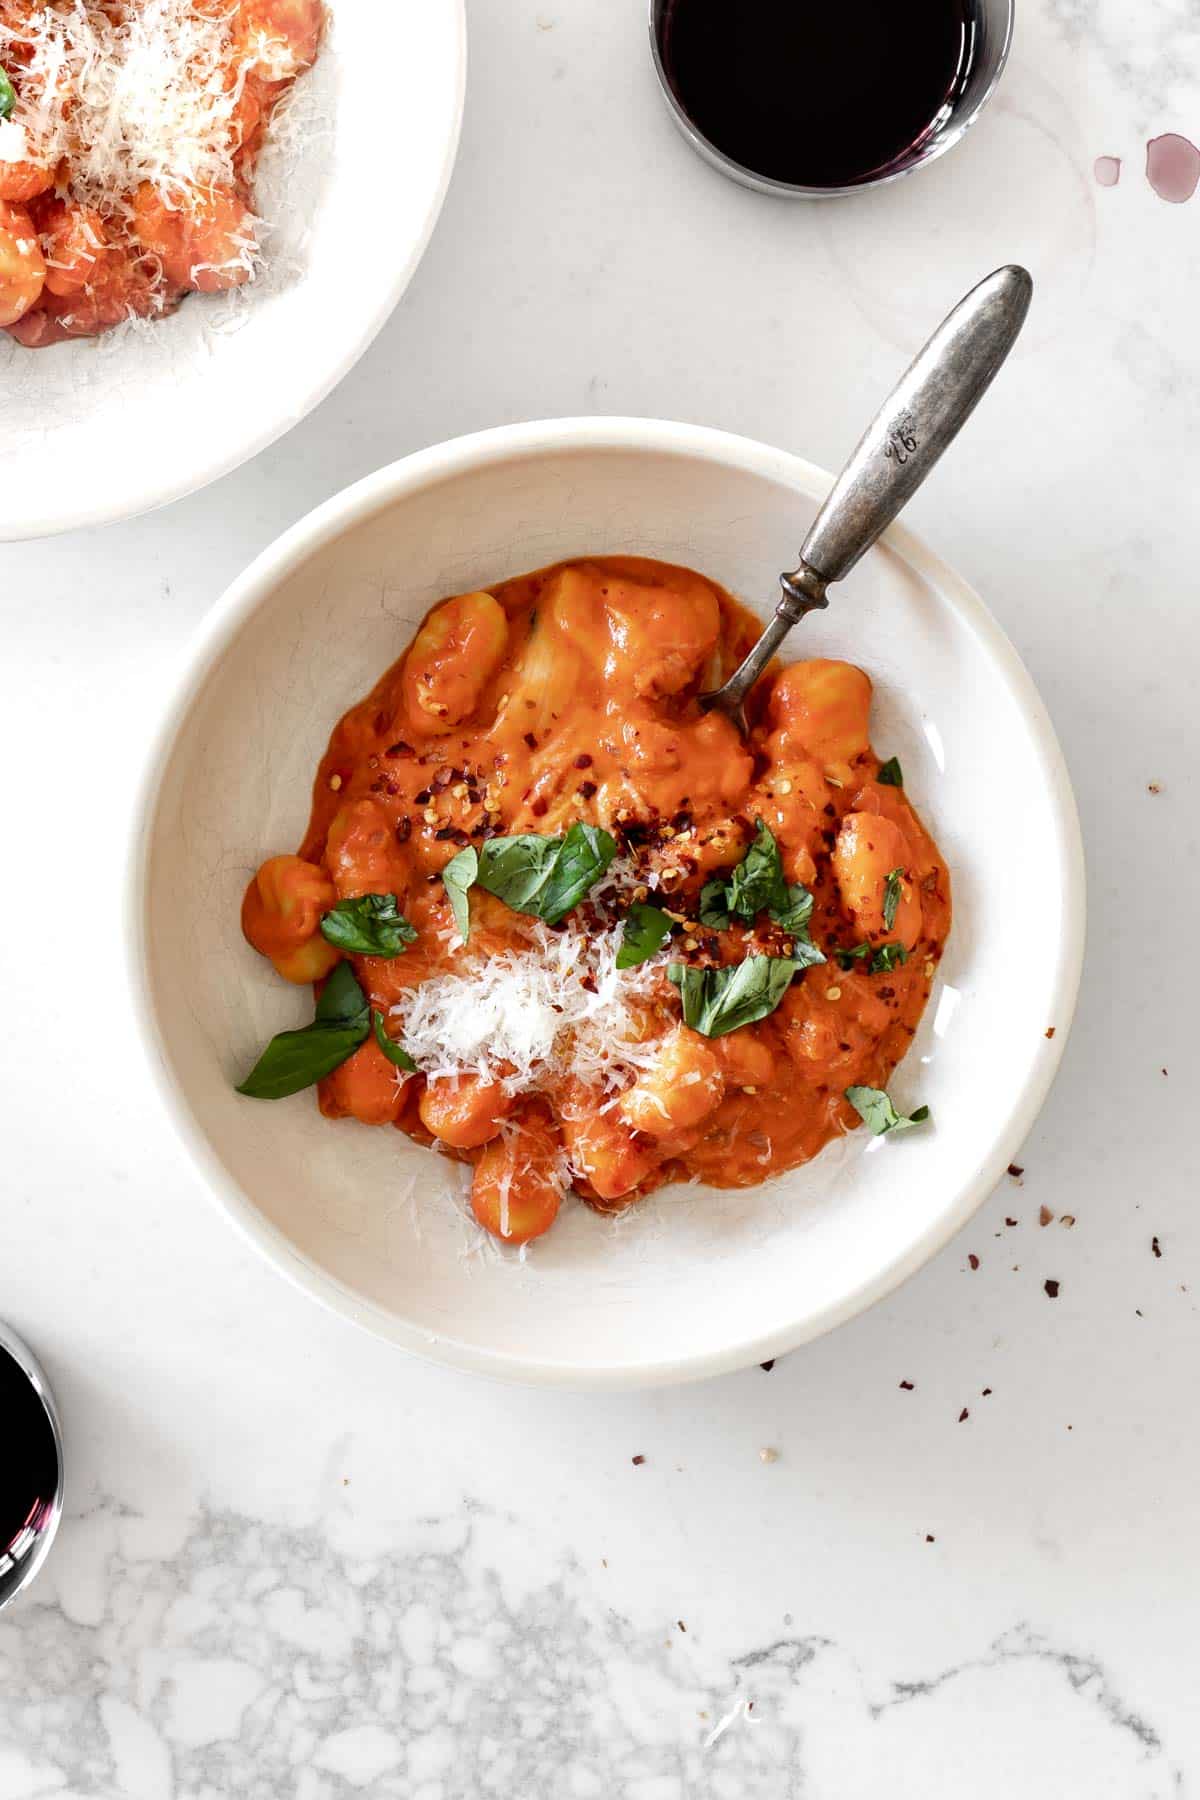 gnocchi in a pasta bowl with a fork topped with basil, parmesan and red pepper flakes with a glass of wine next to it.